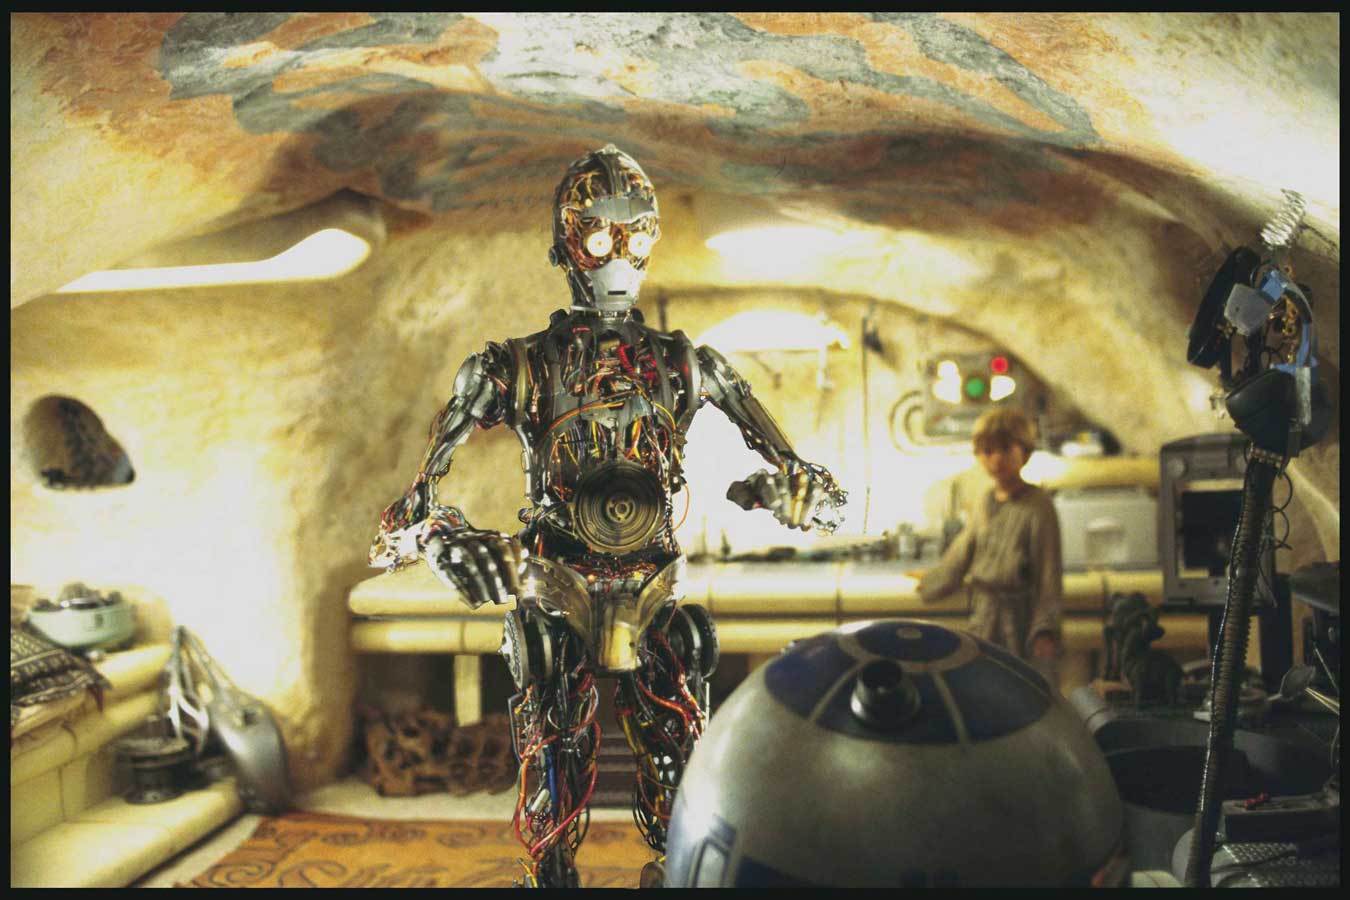 Another significant meeting followed: At Anakin's house, Artoo was introduced to C-3PO, a protoco...